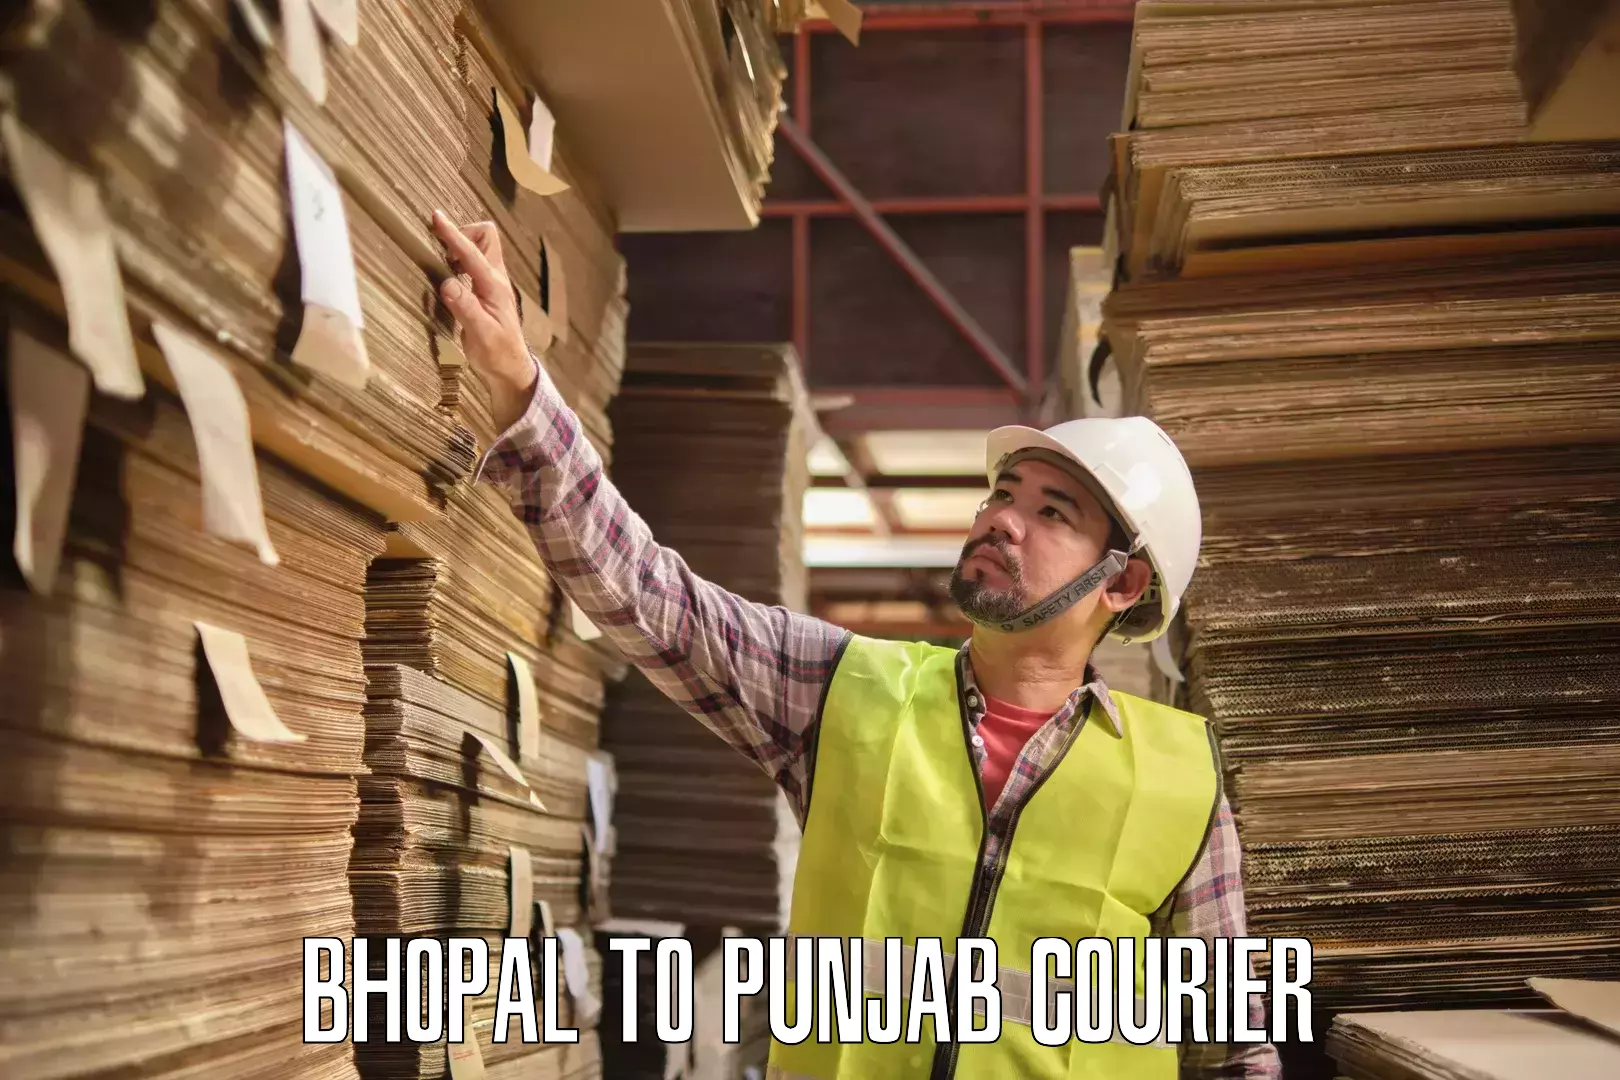 Professional courier handling Bhopal to IIT Ropar